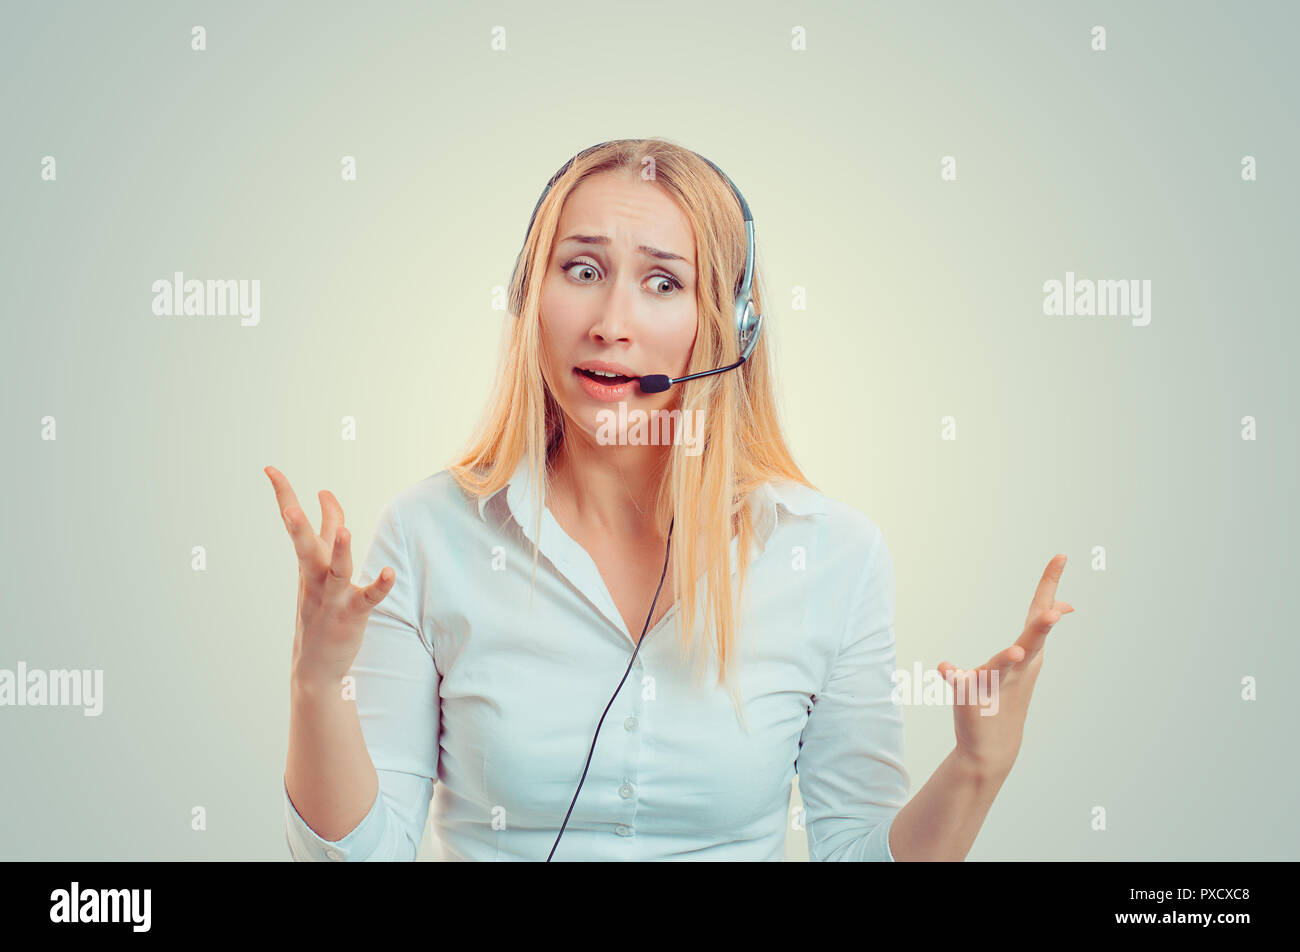 Young blond woman in white shirt wearing headset in puzzlement and gesturing in helplessness Stock Photo